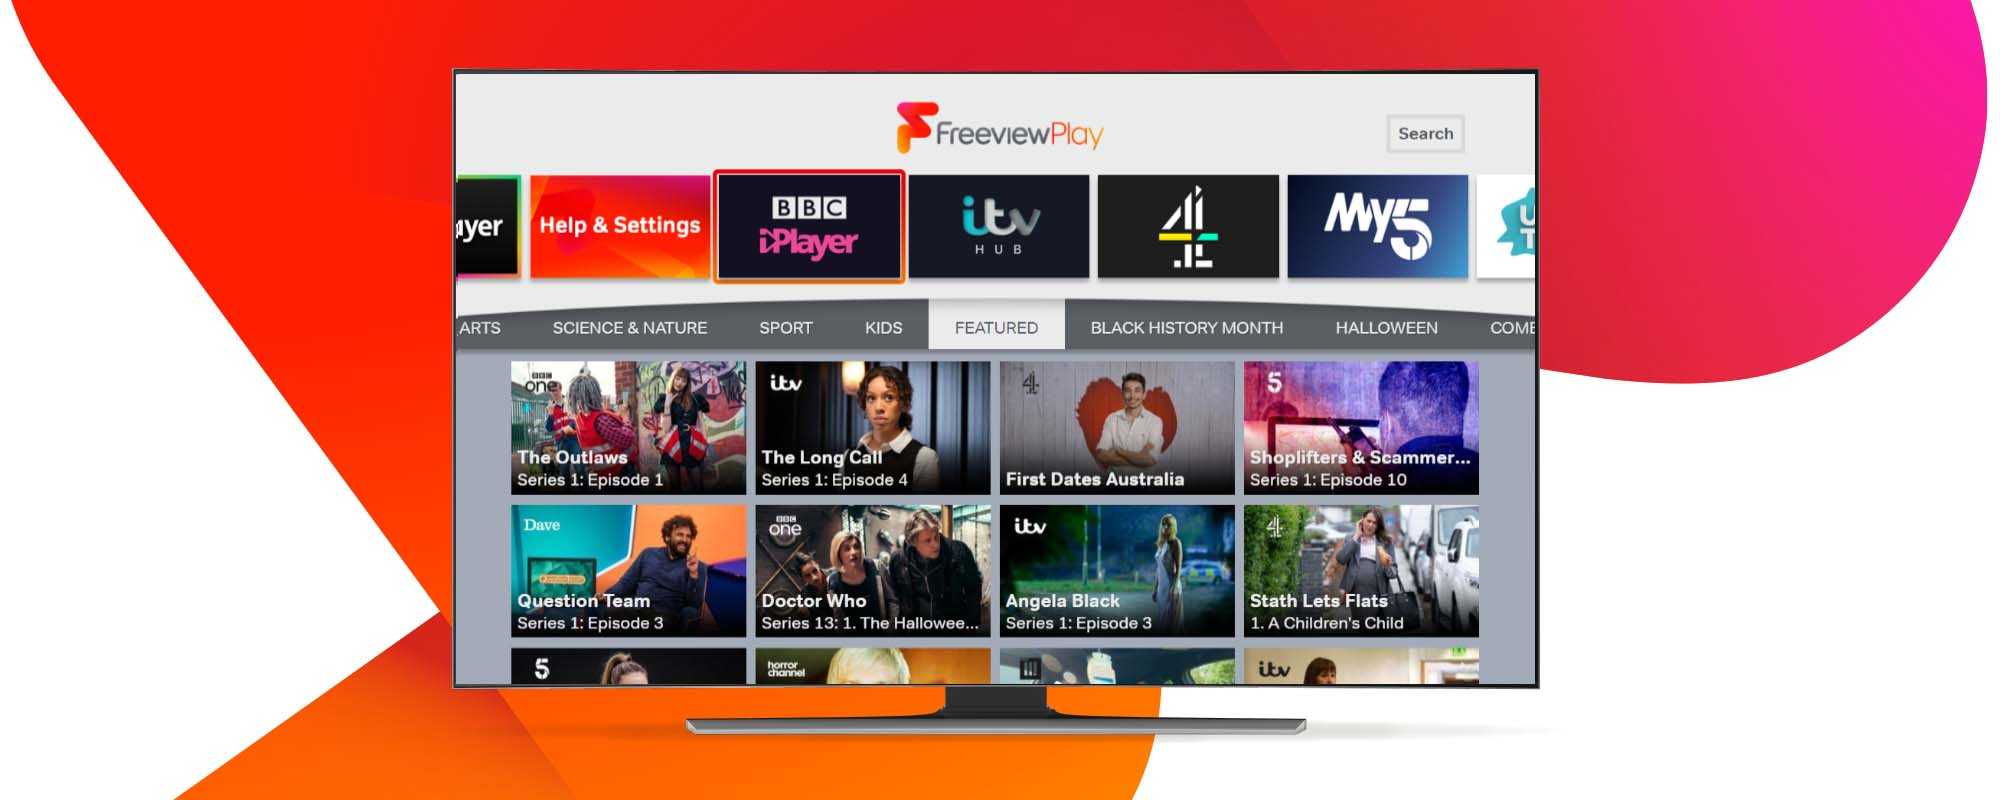 A television screen displaying featured shows and series on Freeview Play, amongst other categories and apps selection.